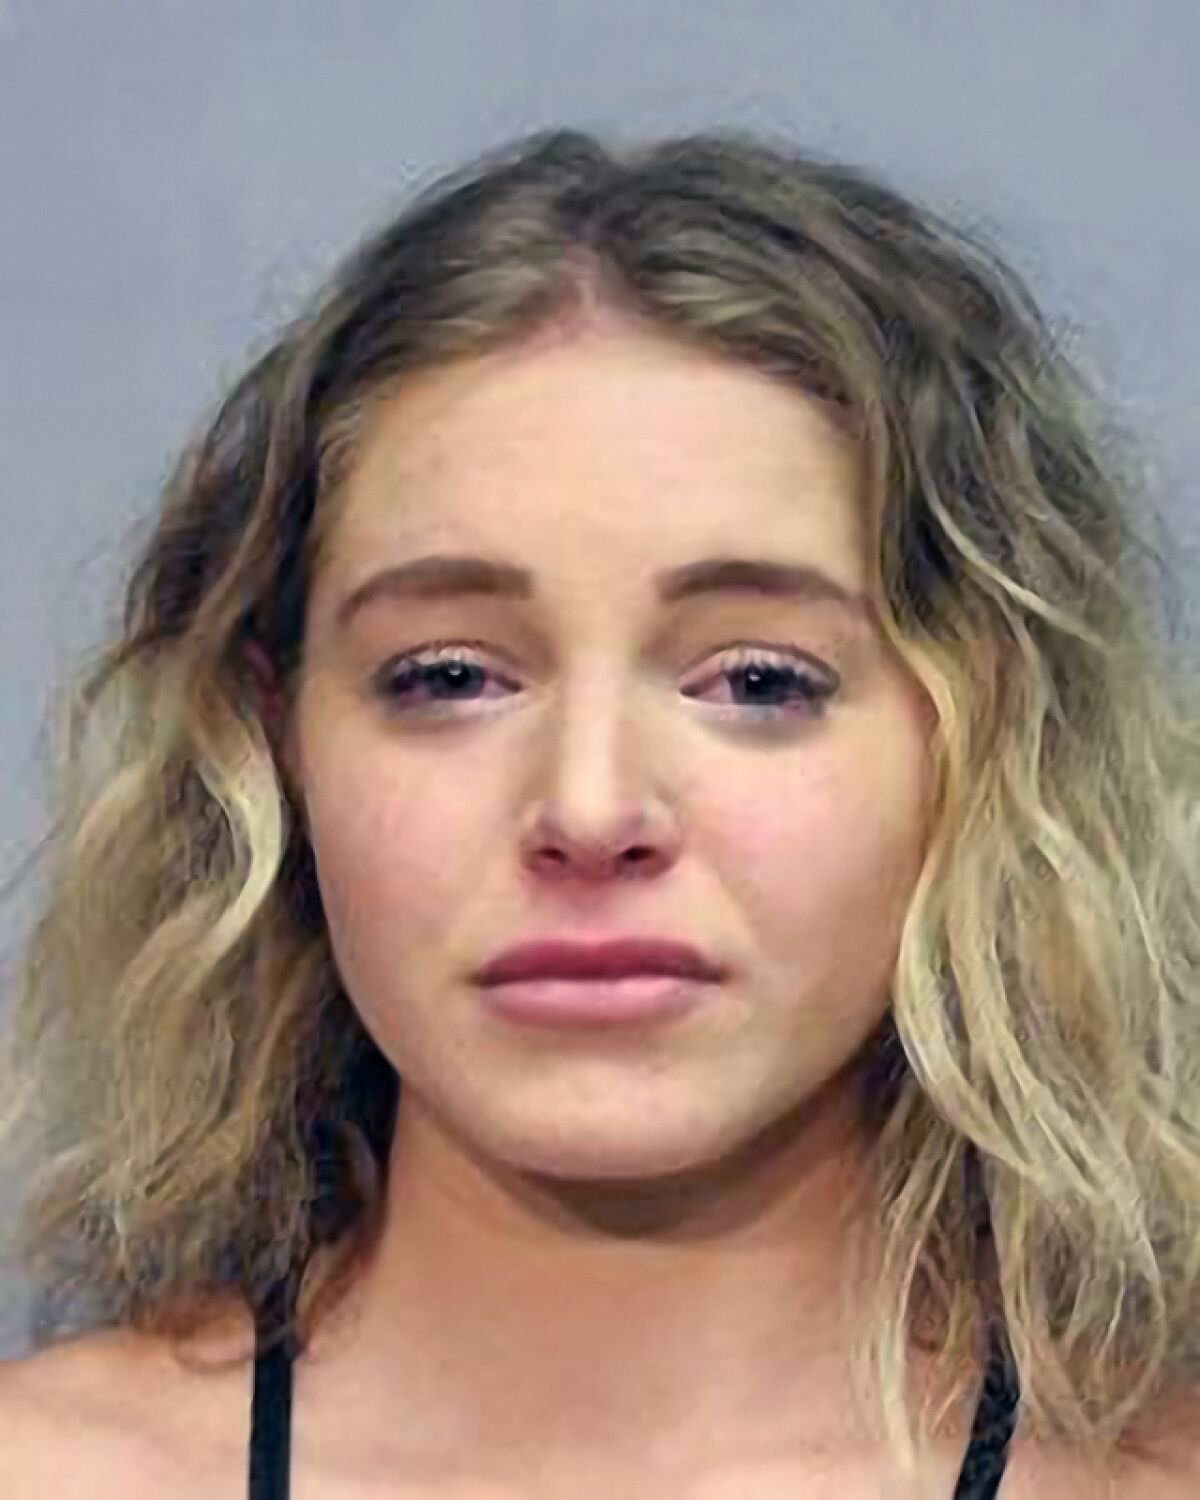 This photo provided by the Hawaii Police Department shows Courtney Clenney. Law enforcement in Hawaii on Wednesday. Aug. 10, 2022 arrested social media model Courtney Clenney on a charge of second-degree murder with a deadly weapon. Hawaii County police said in a statement they assisted the U.S. Marshals Service as they arrested the 26-year-old on the Big Island. (Hawaii Police Department via AP)